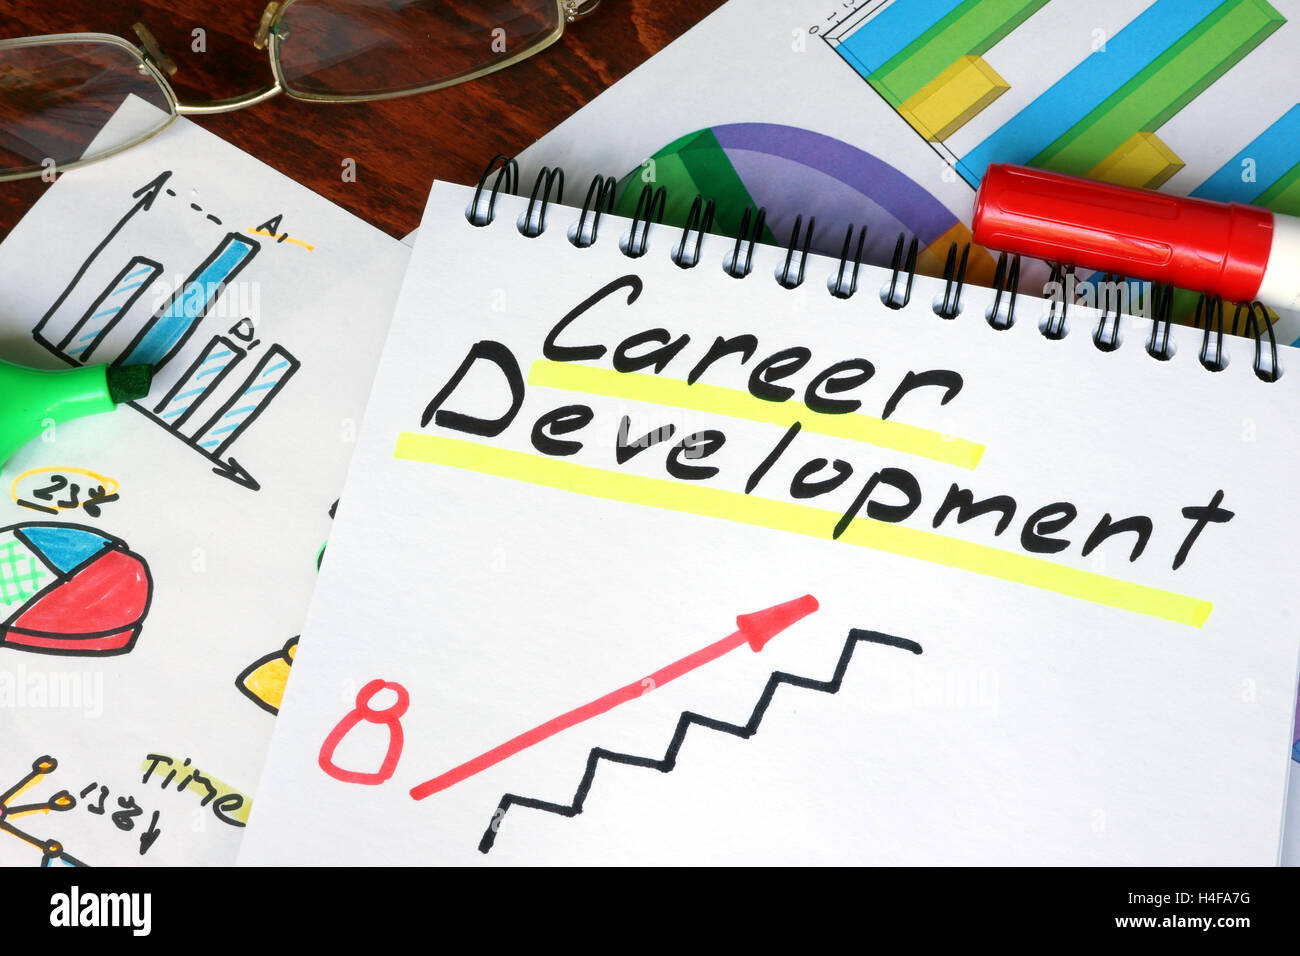 Notepad with Career Development on a wooden surface. Stock Photo